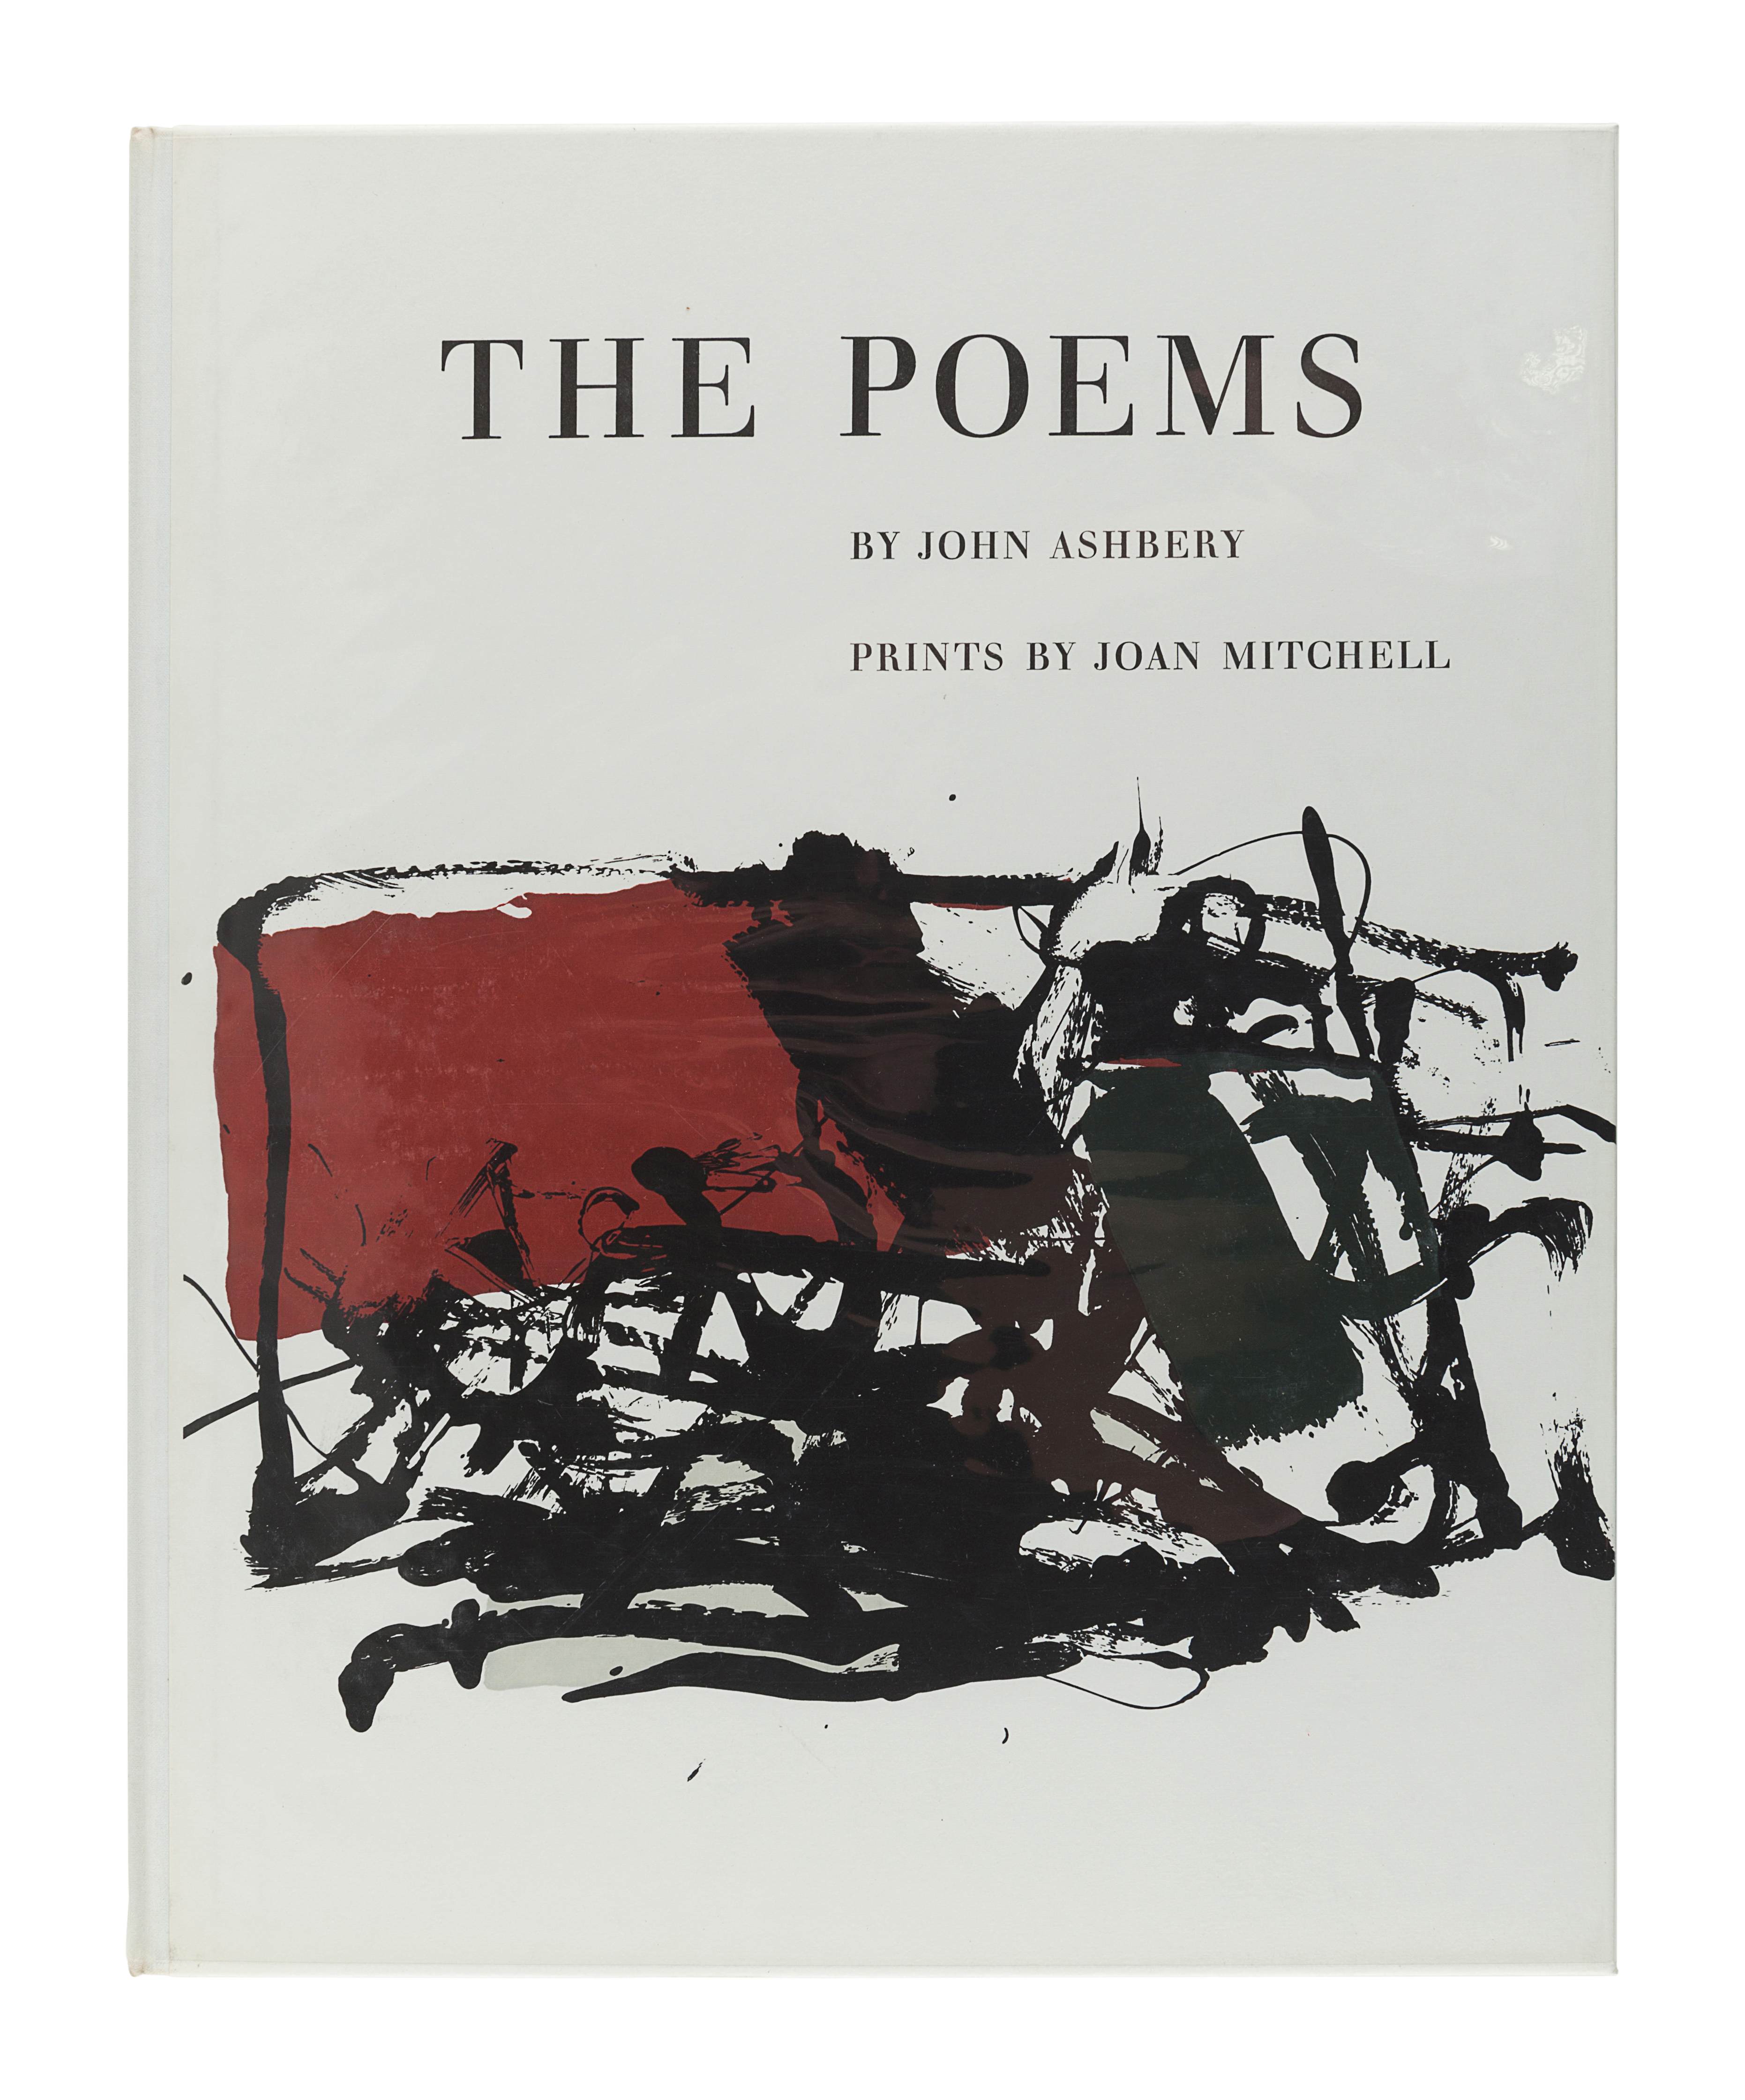 [TIBER PRESS - ABSTRACT EXPRESSIONISM]. ASHBERY, John. The Poems. Prints by Joan MITCHELL. -- KOCH, - Image 4 of 8